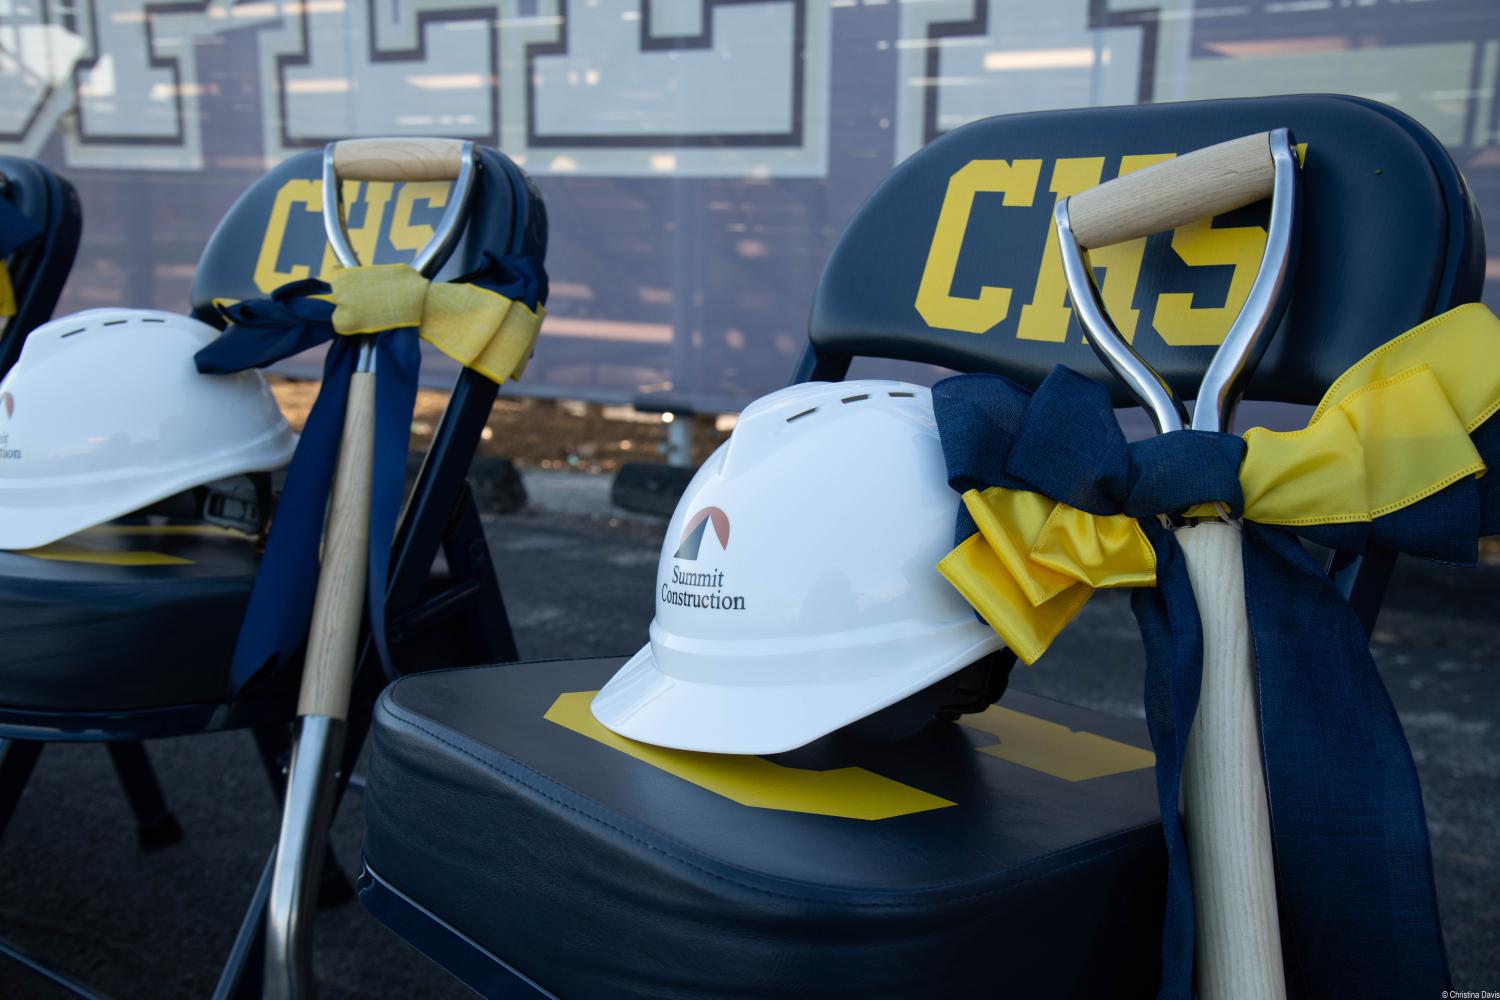 Hard Hats on Chairs at Groundbreaking